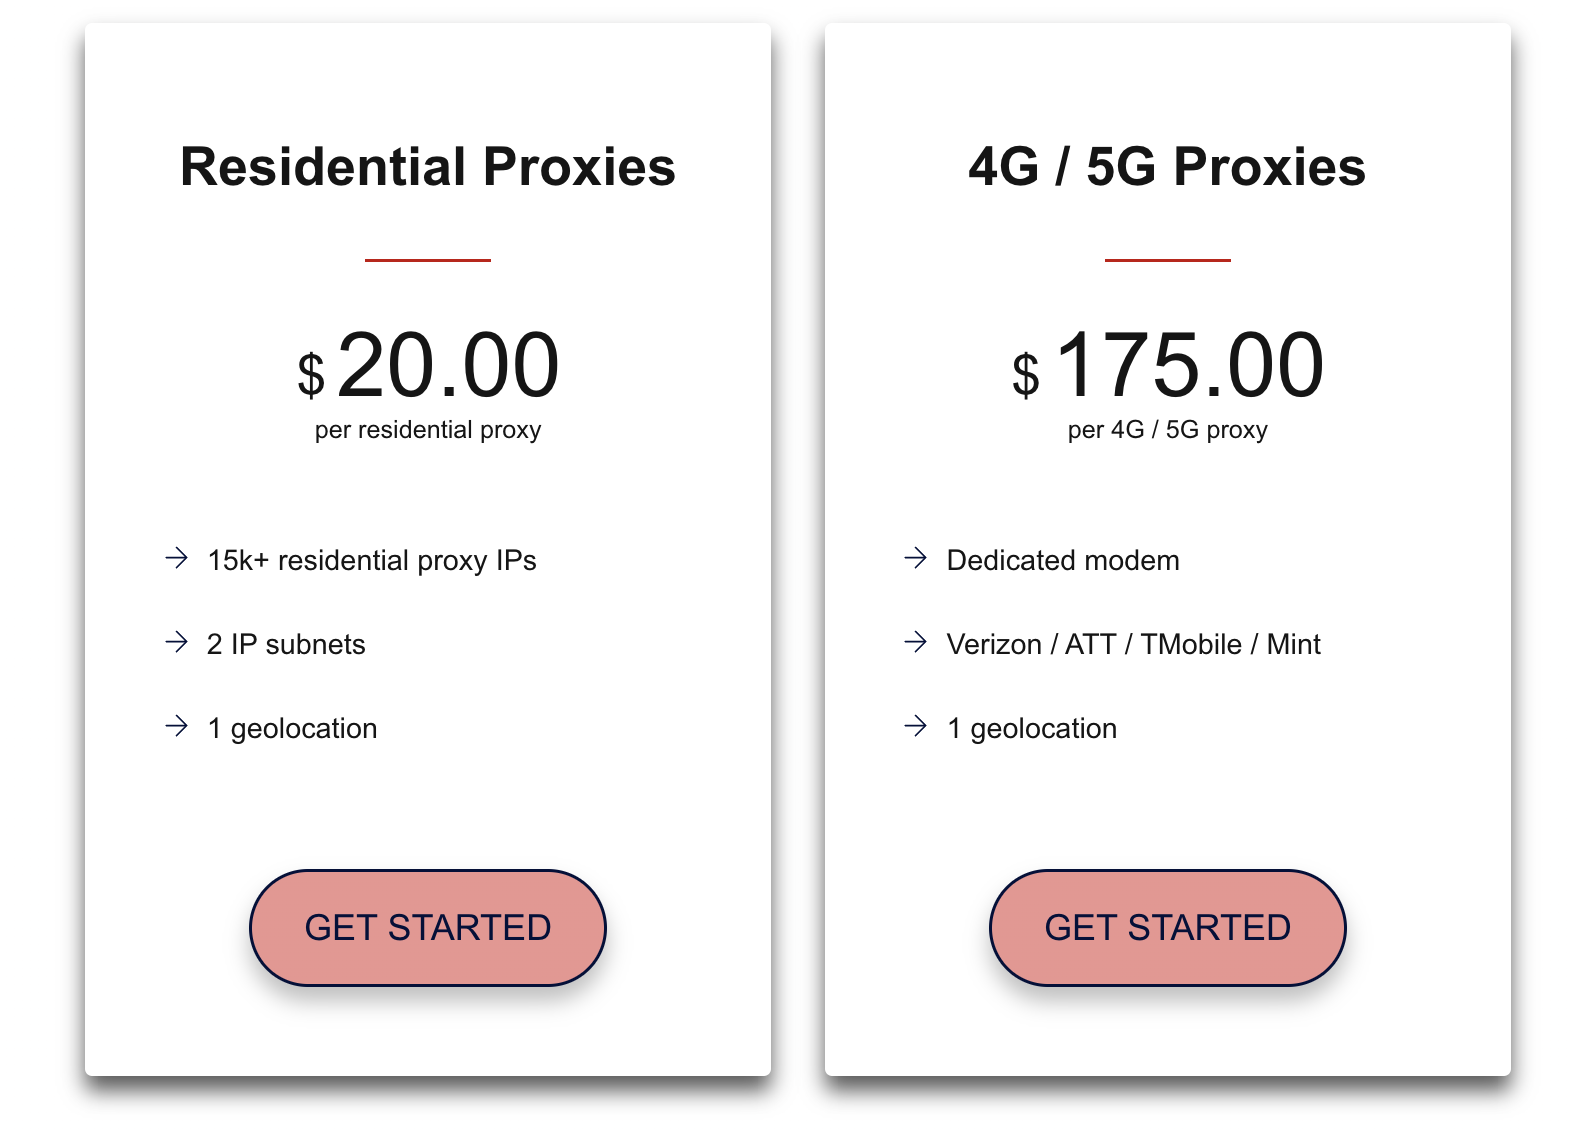 More Pricing Plans Of NinjaProxy